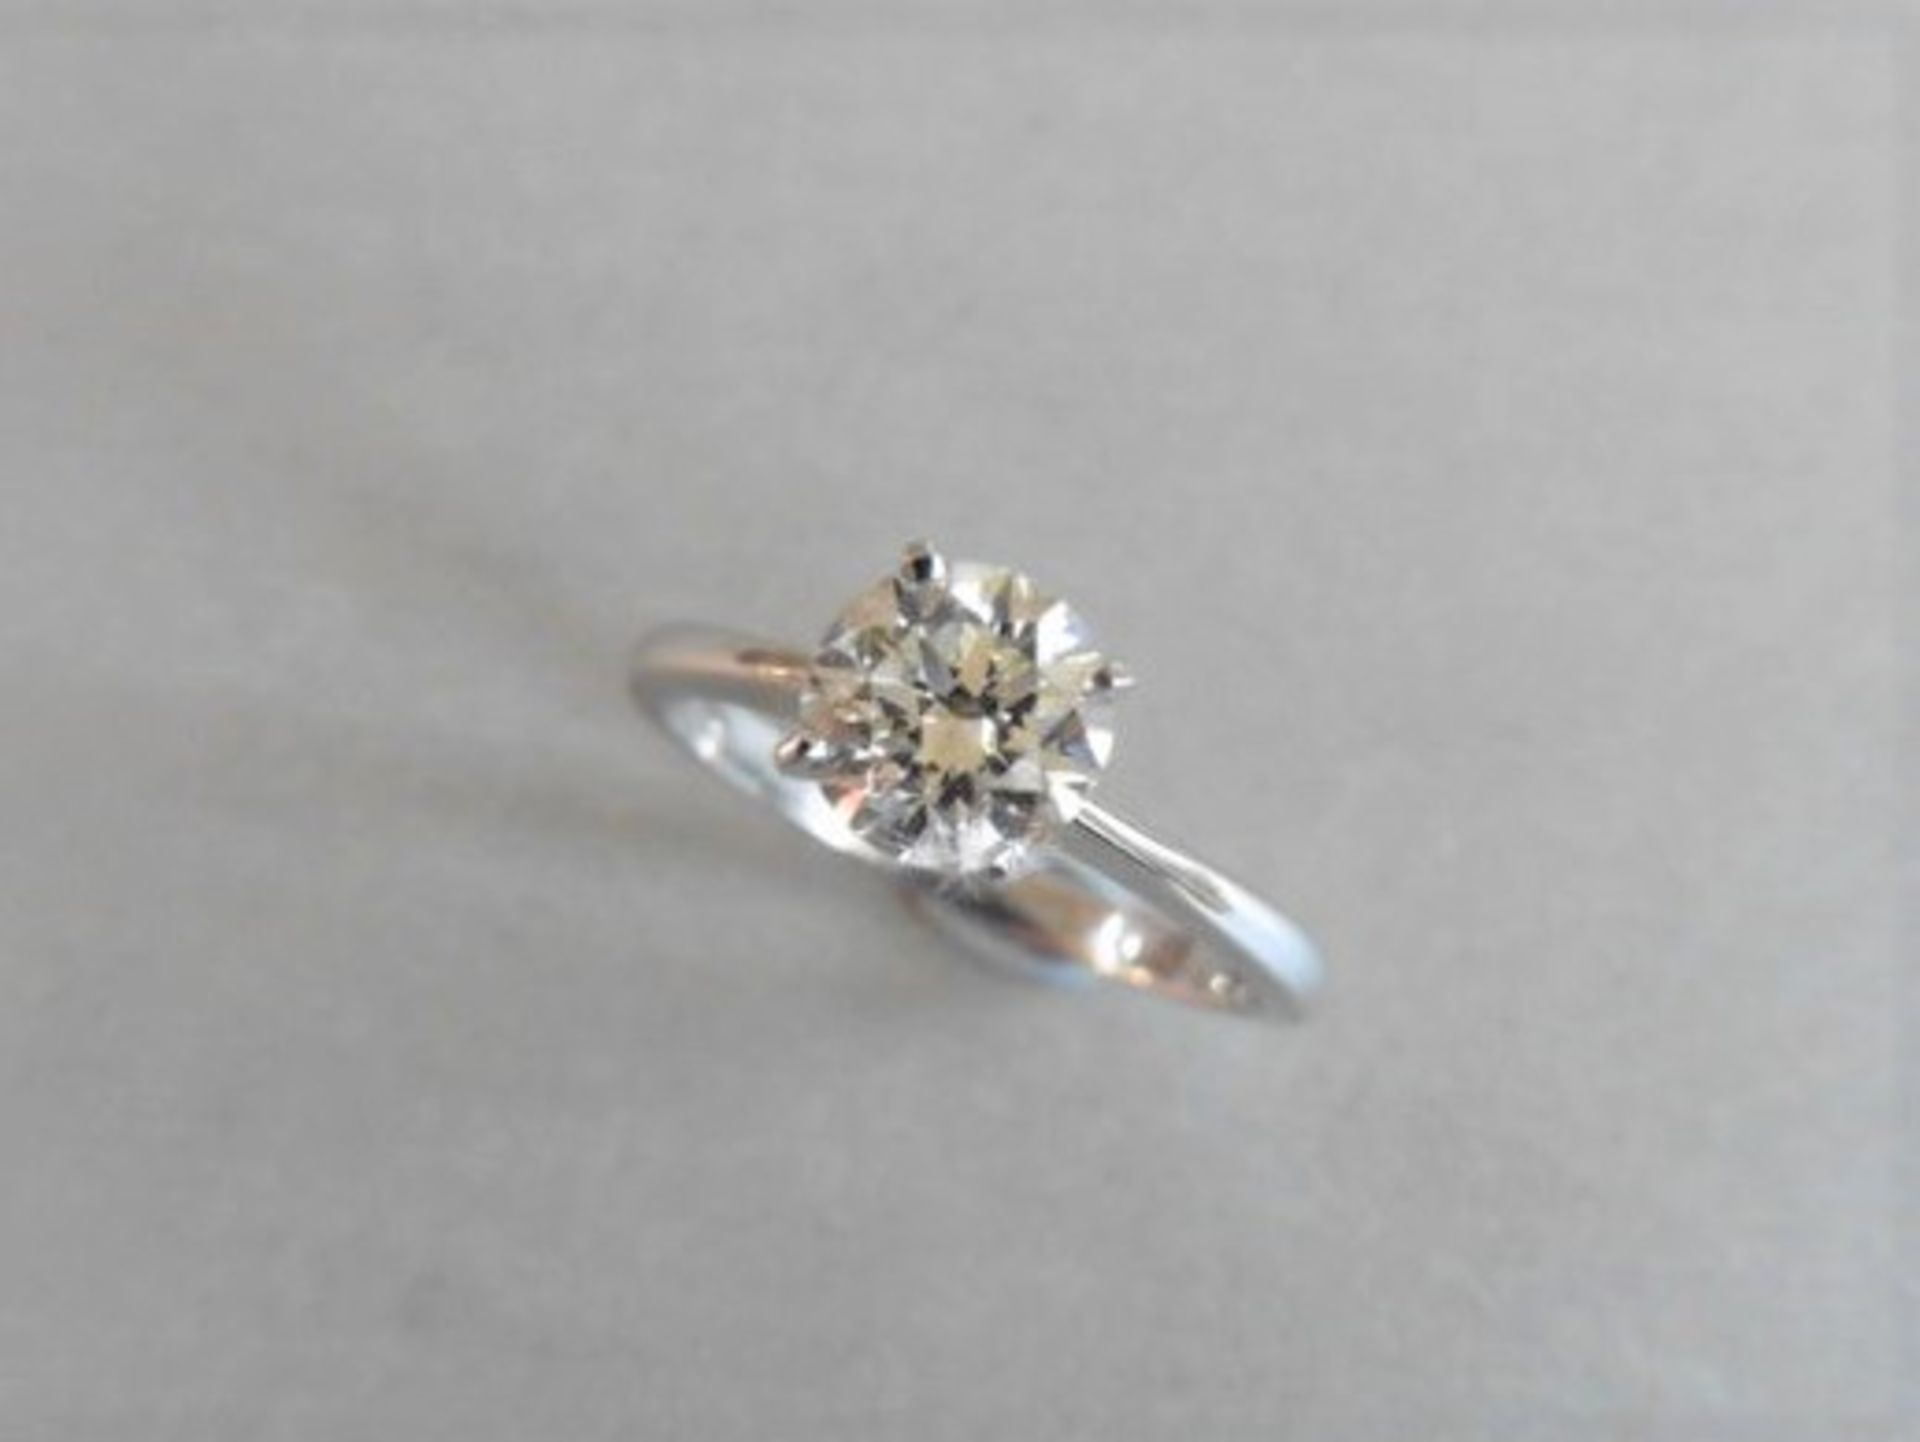 1.00ct diamond solitaire ring set in platinum. I colour and I1 clarity. 4 claw setting, size M.